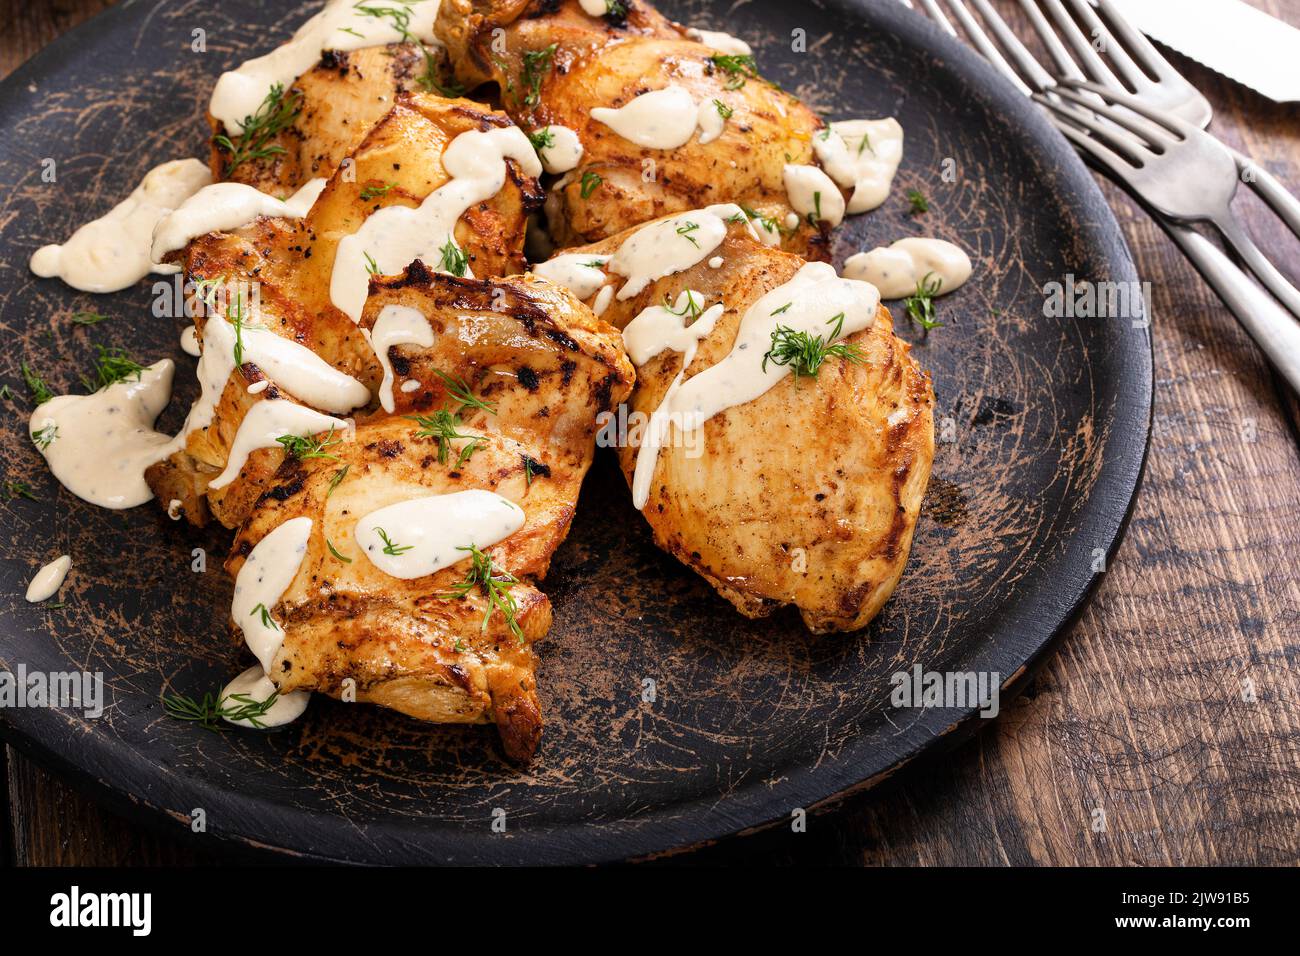 Roasted chicken thighs with dill pickle sauce Stock Photo